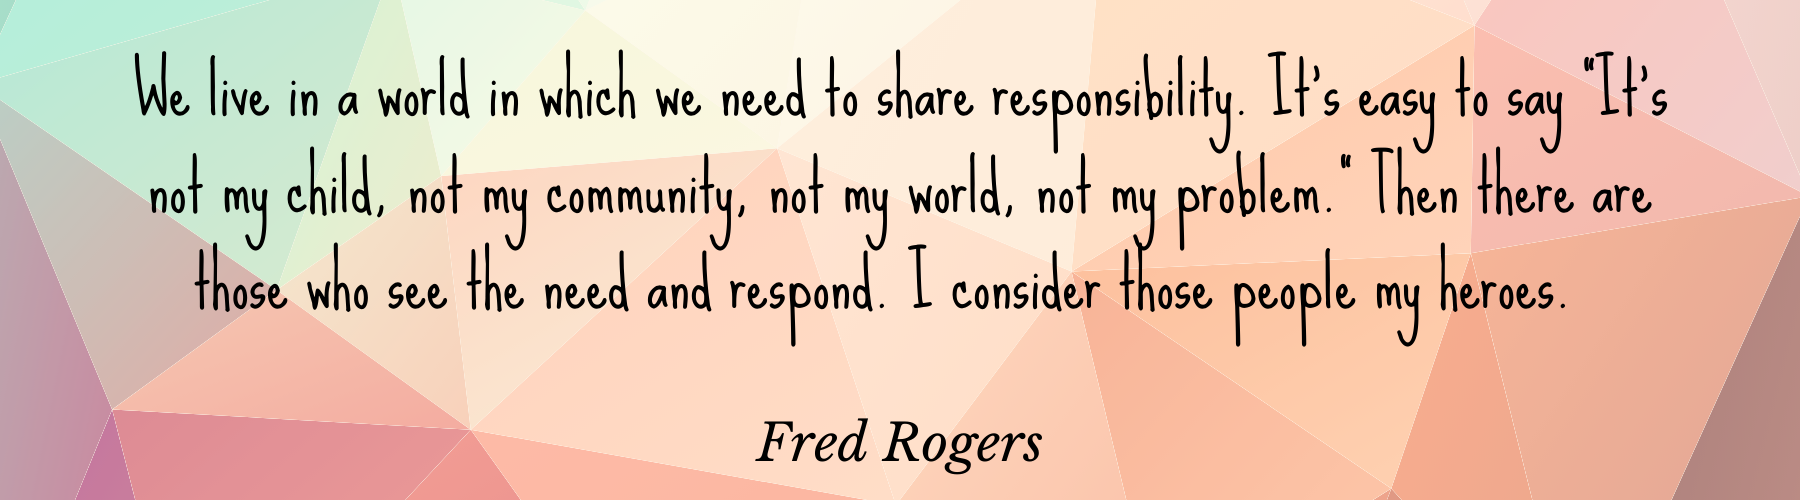 We live in a world in which we need to share responsibility. It's easy to say "It's not my child, not my community, not my world, not my problem." Then there are those who see the need and respond. I consider those people my heroes. -Fred Rogers